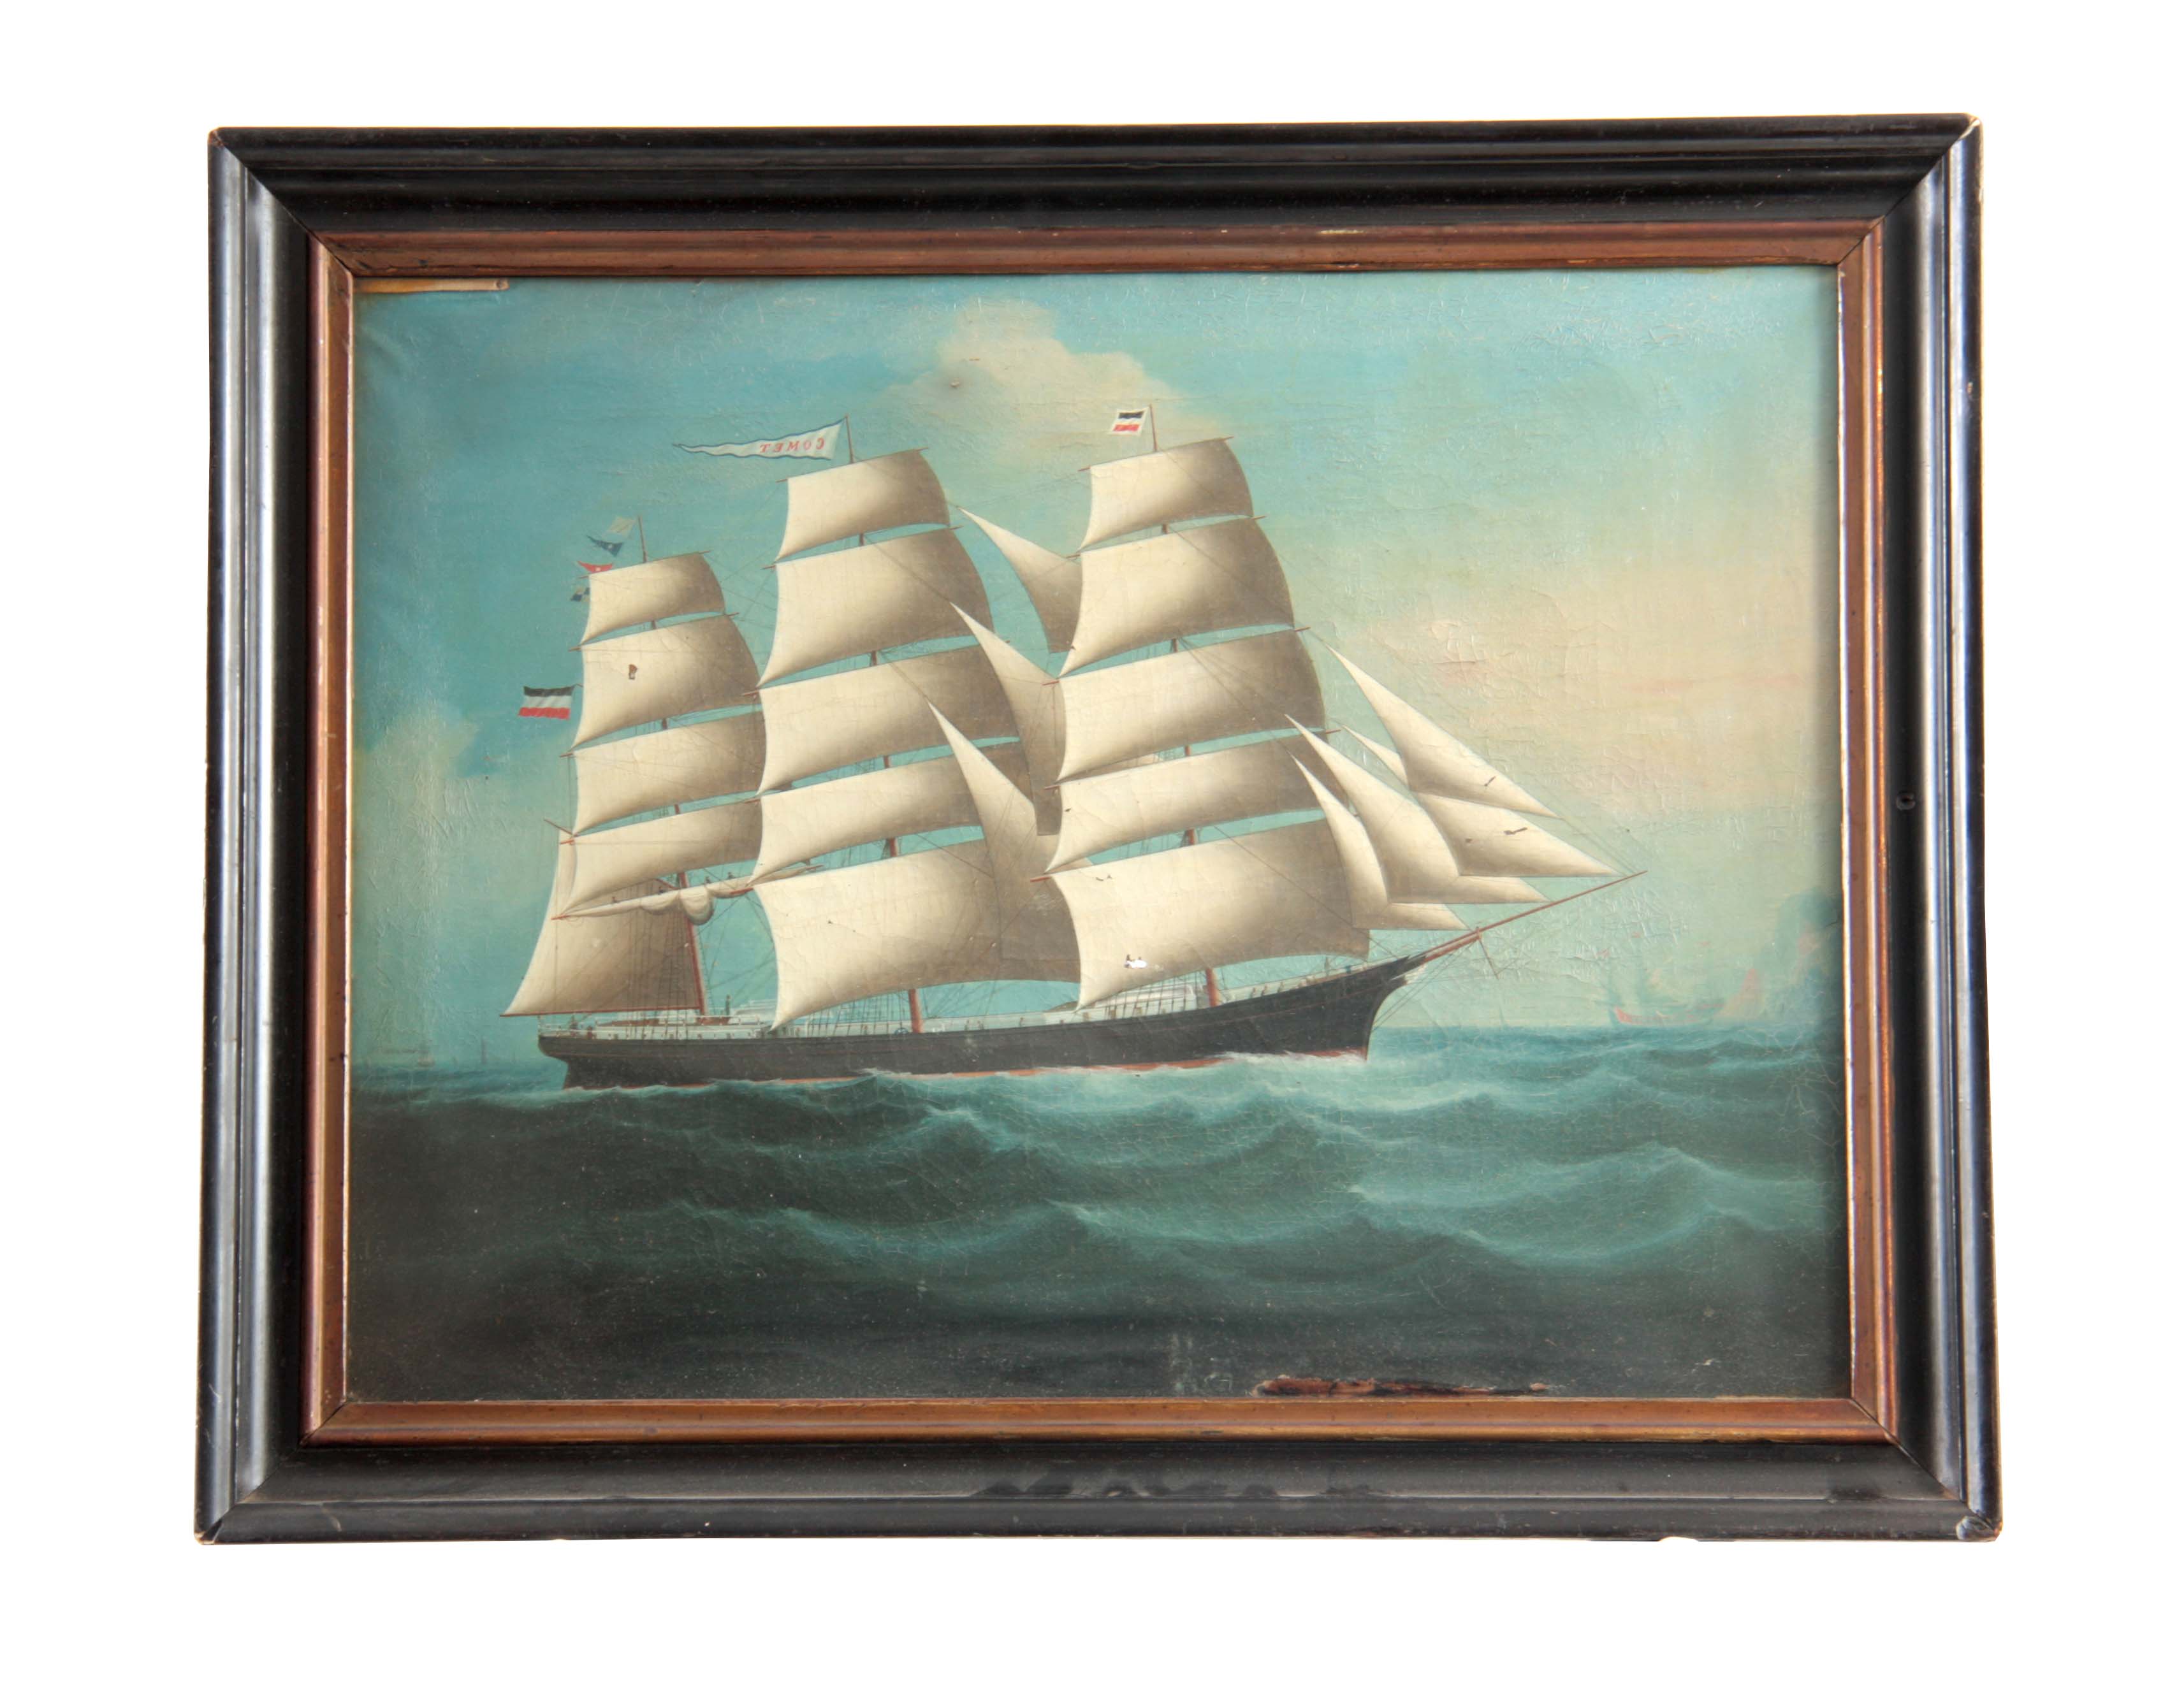 A MID 19TH CENTURY CHINESE TRADE SHIP PORTRAIT of the Comet sailing into Hong Kong 44cm high, 58cm